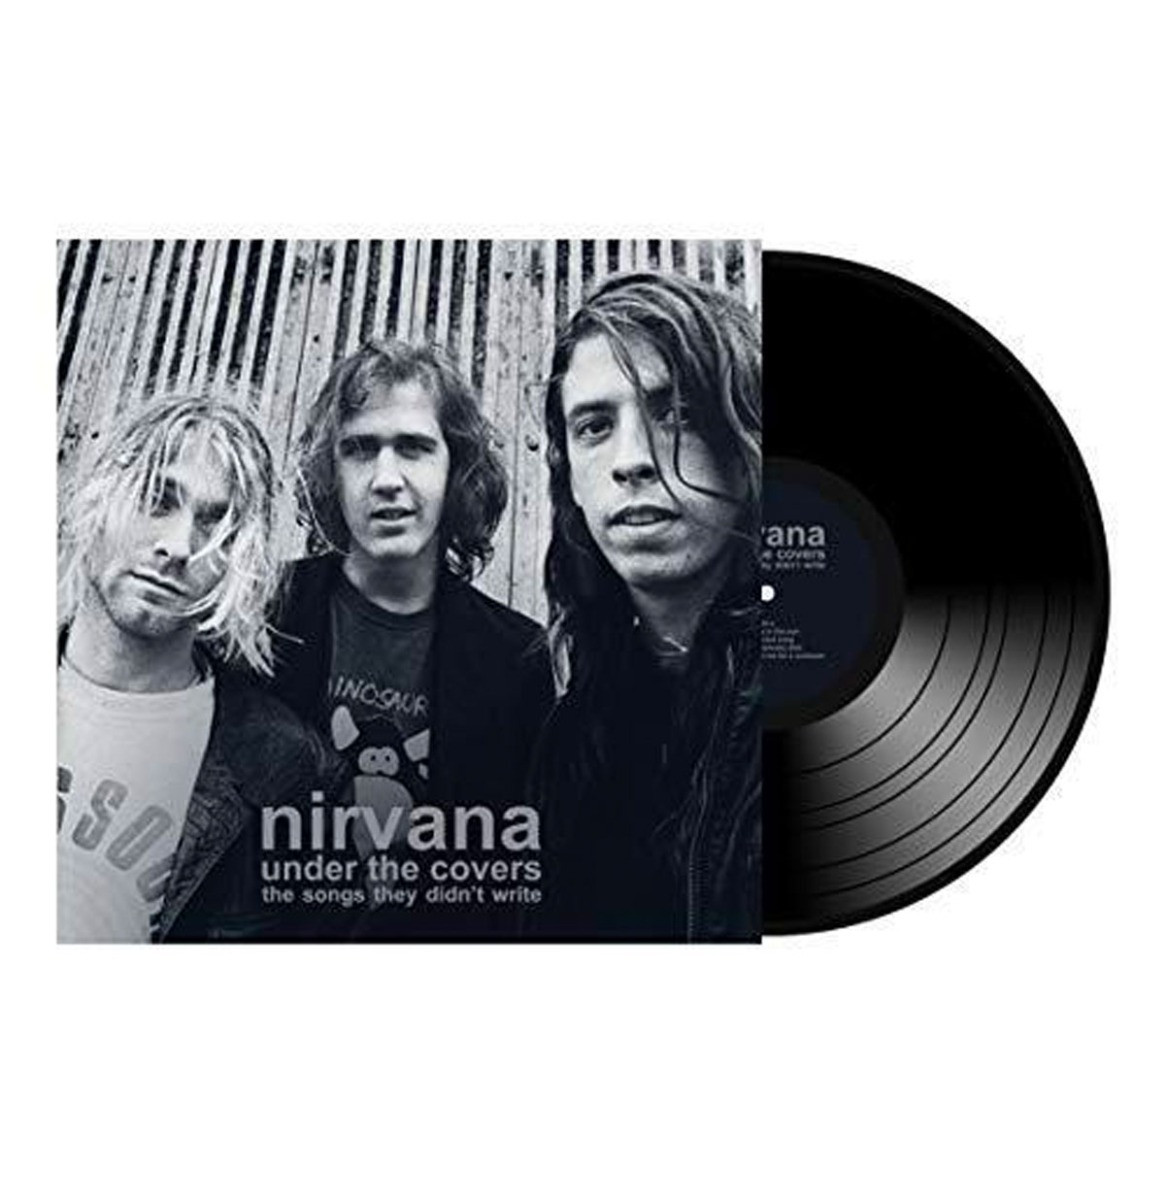 Nirvana - Under The Covers: The Songs They Didn&apos;t Write 2LP